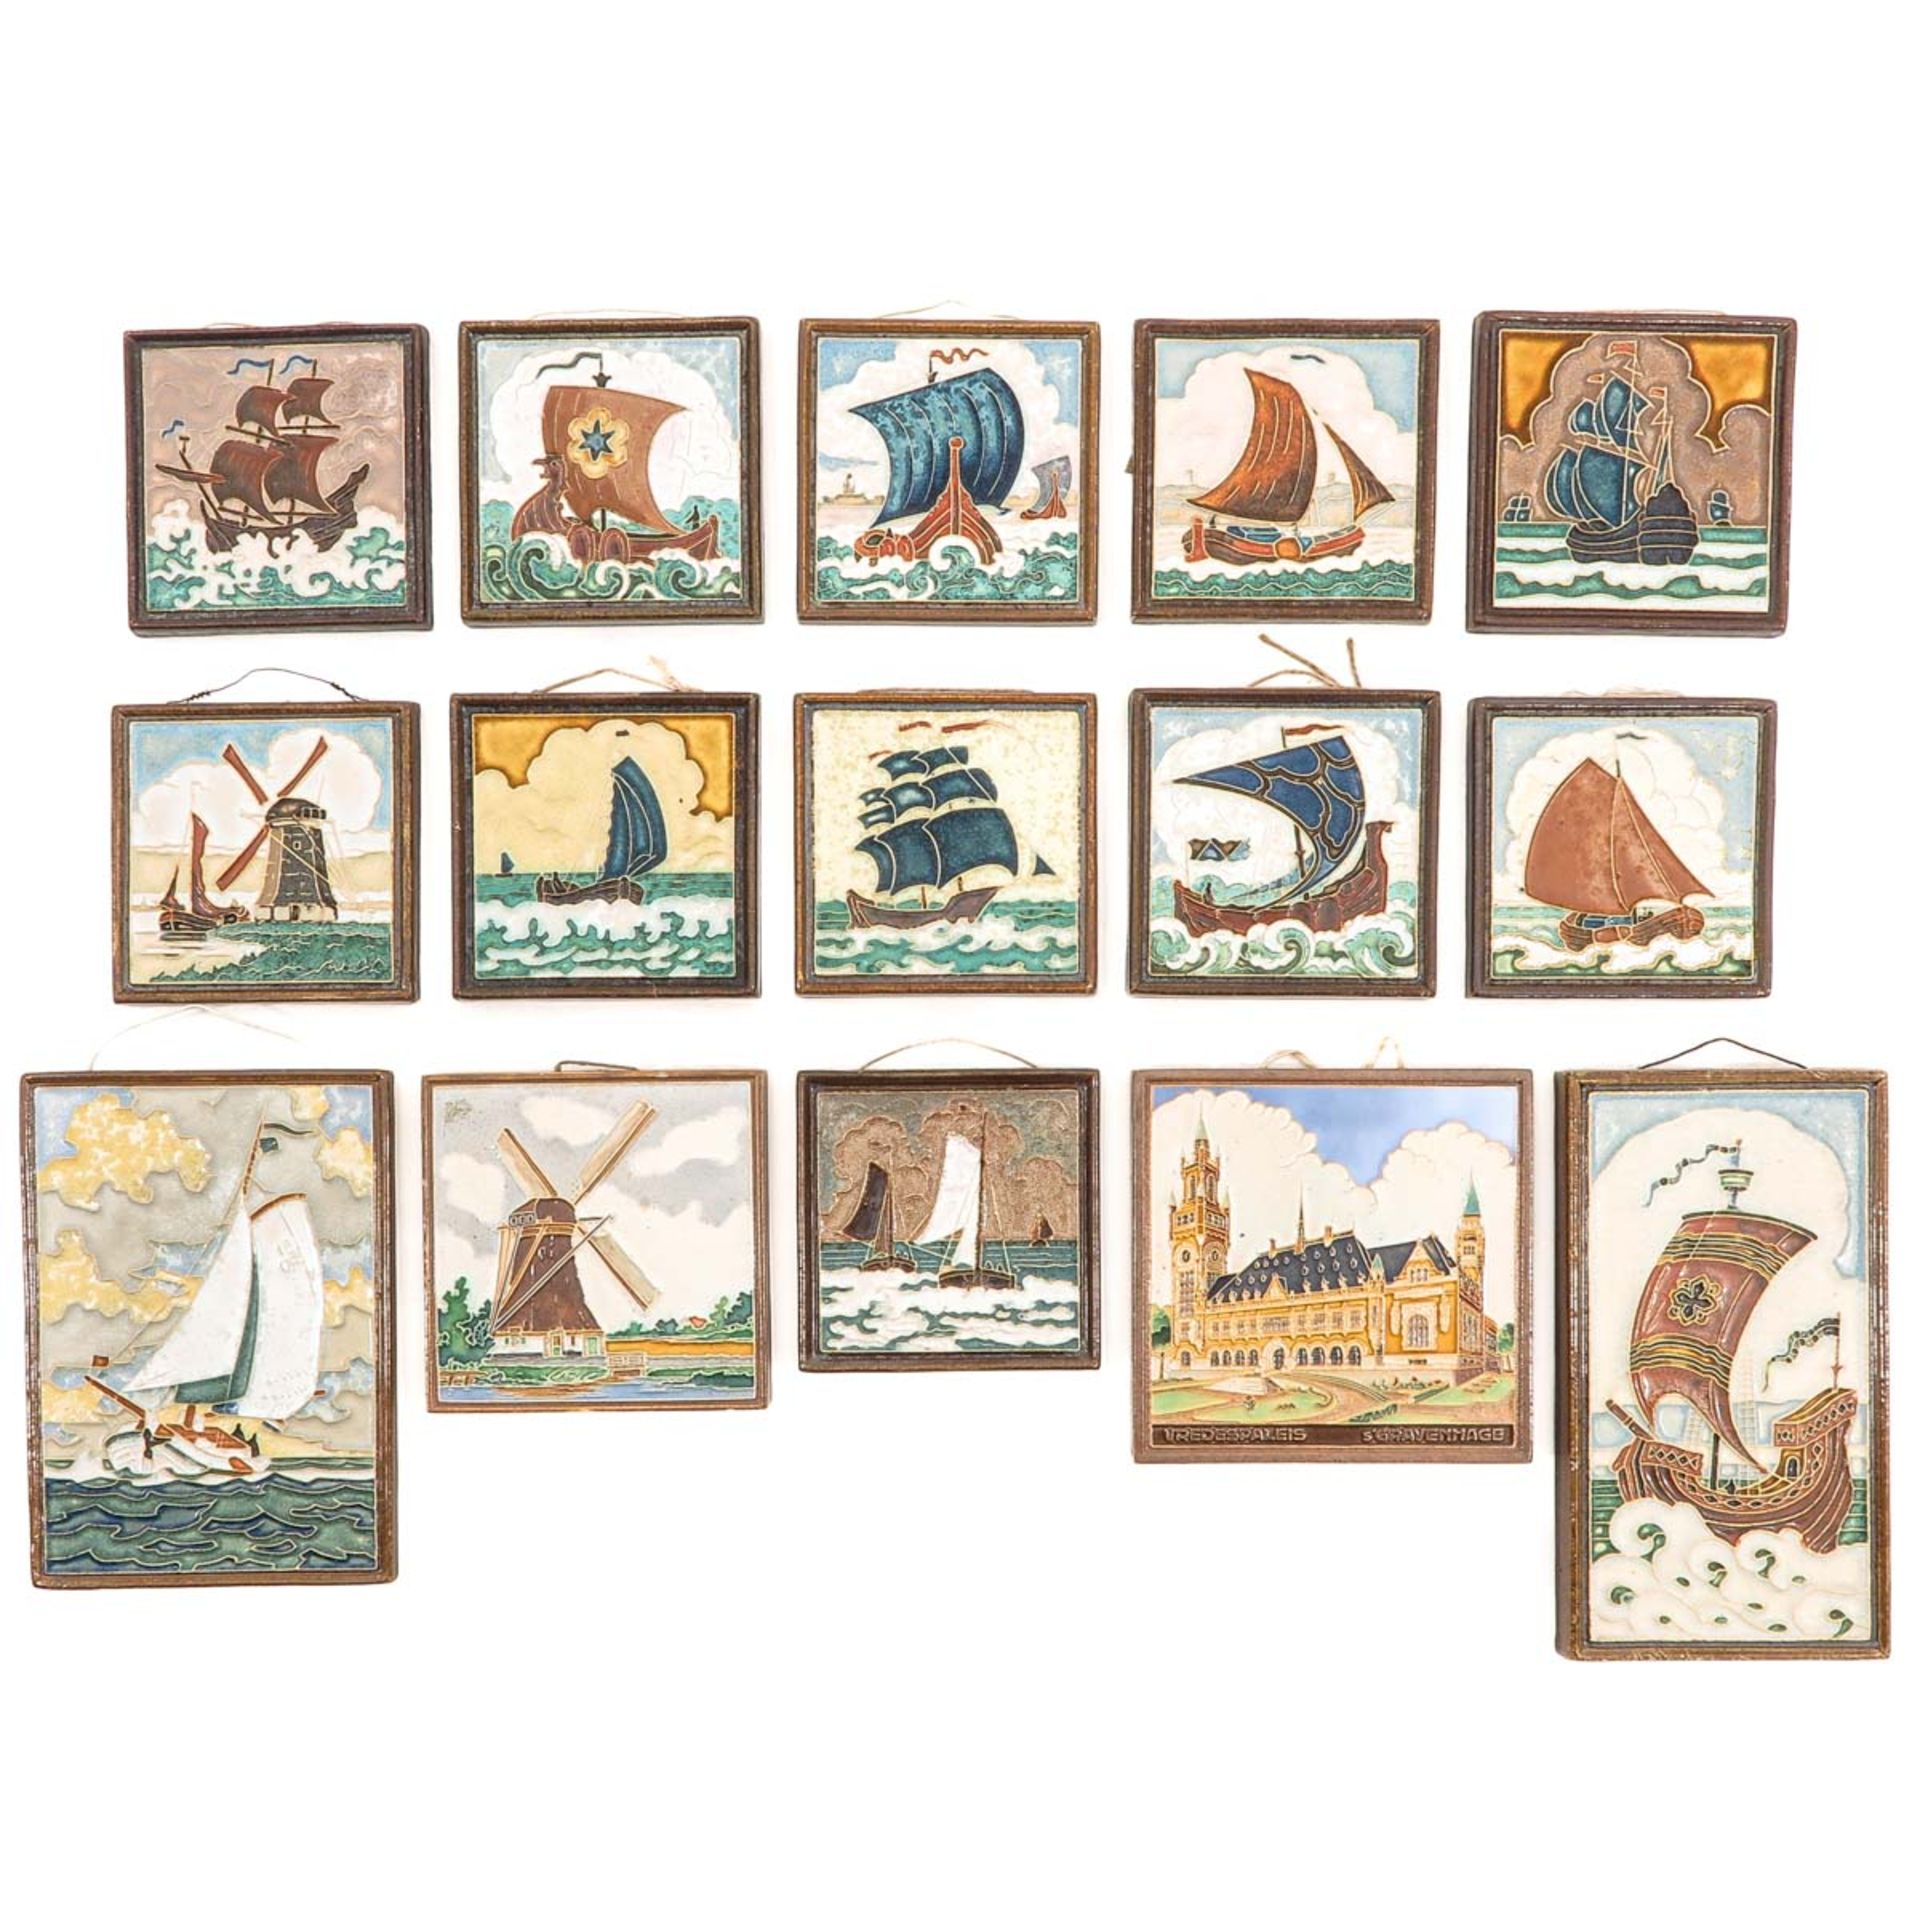 A Collection of 15 Cloisonne Tiles